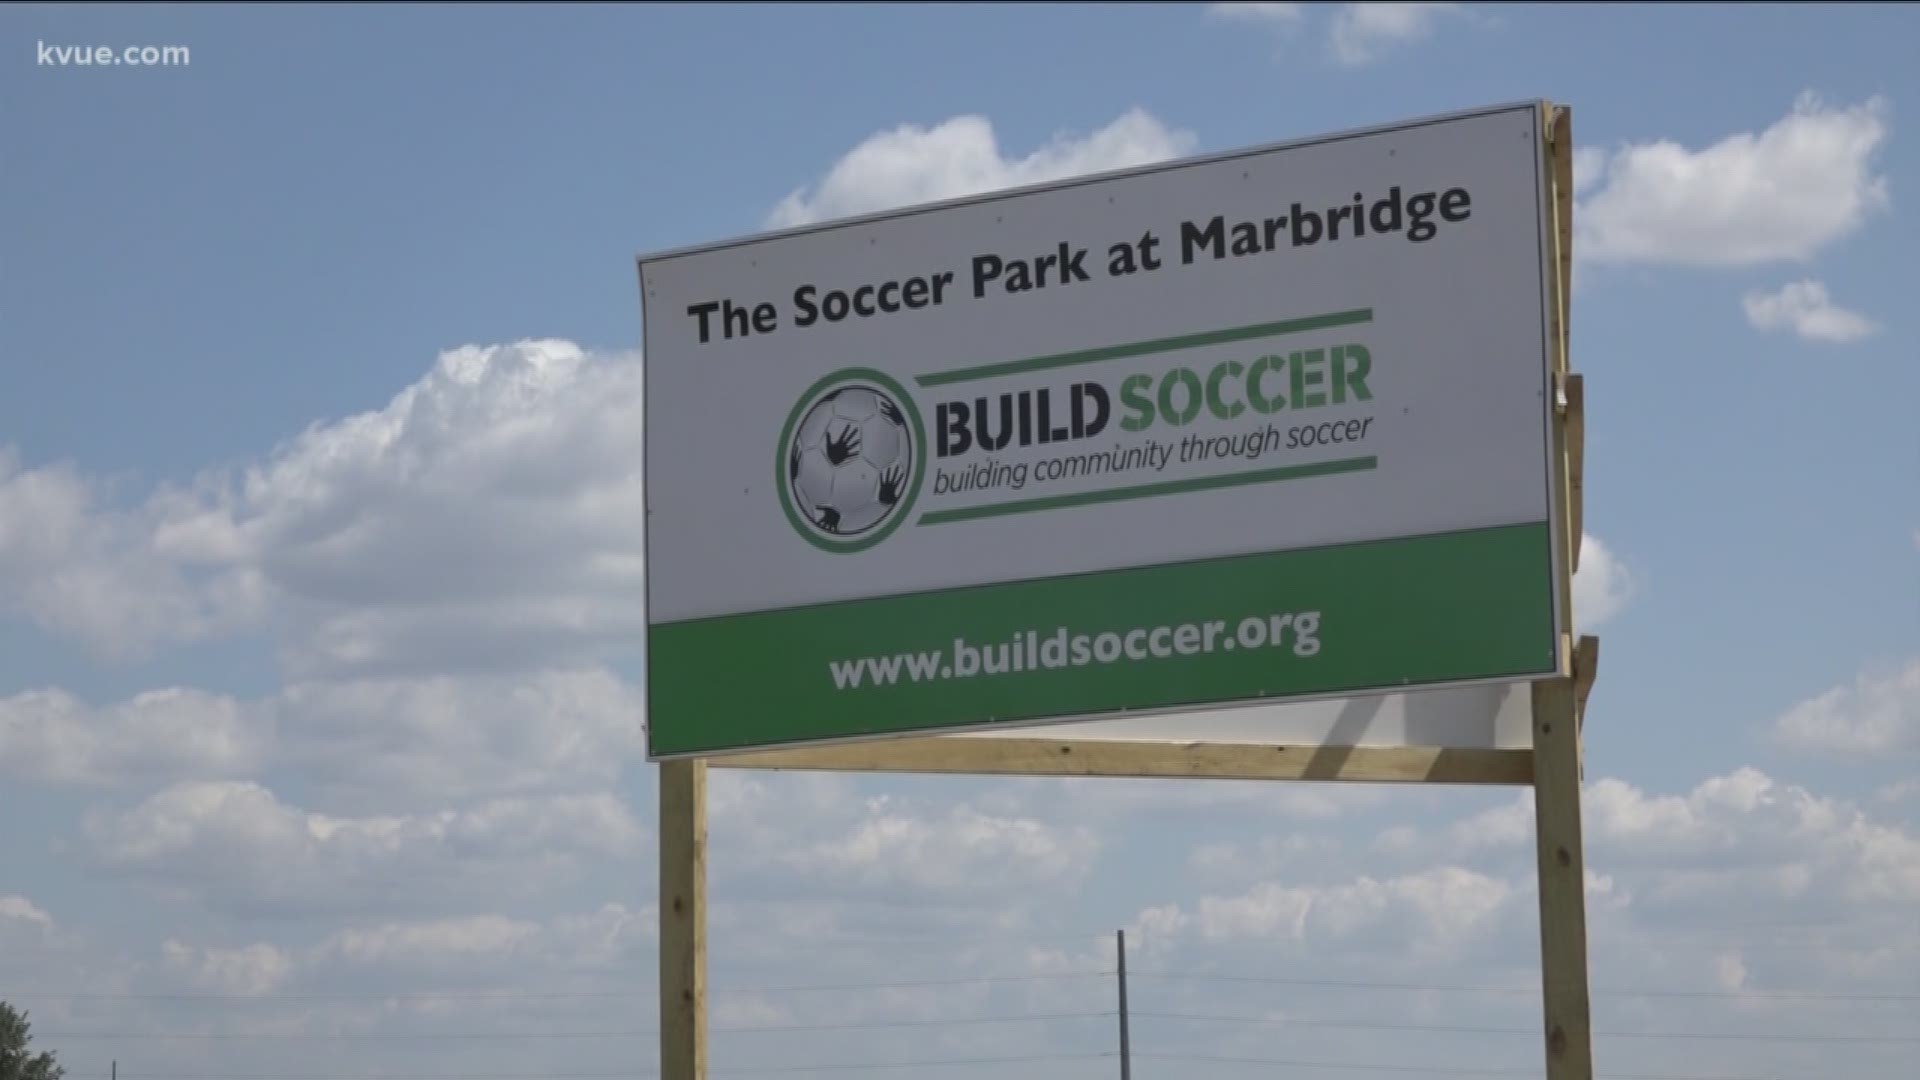 There's a lot of growth taking place in the Austin soccer community, but is there enough space to play? One local group has big plans to build a six-field soccer facility in South Austin.